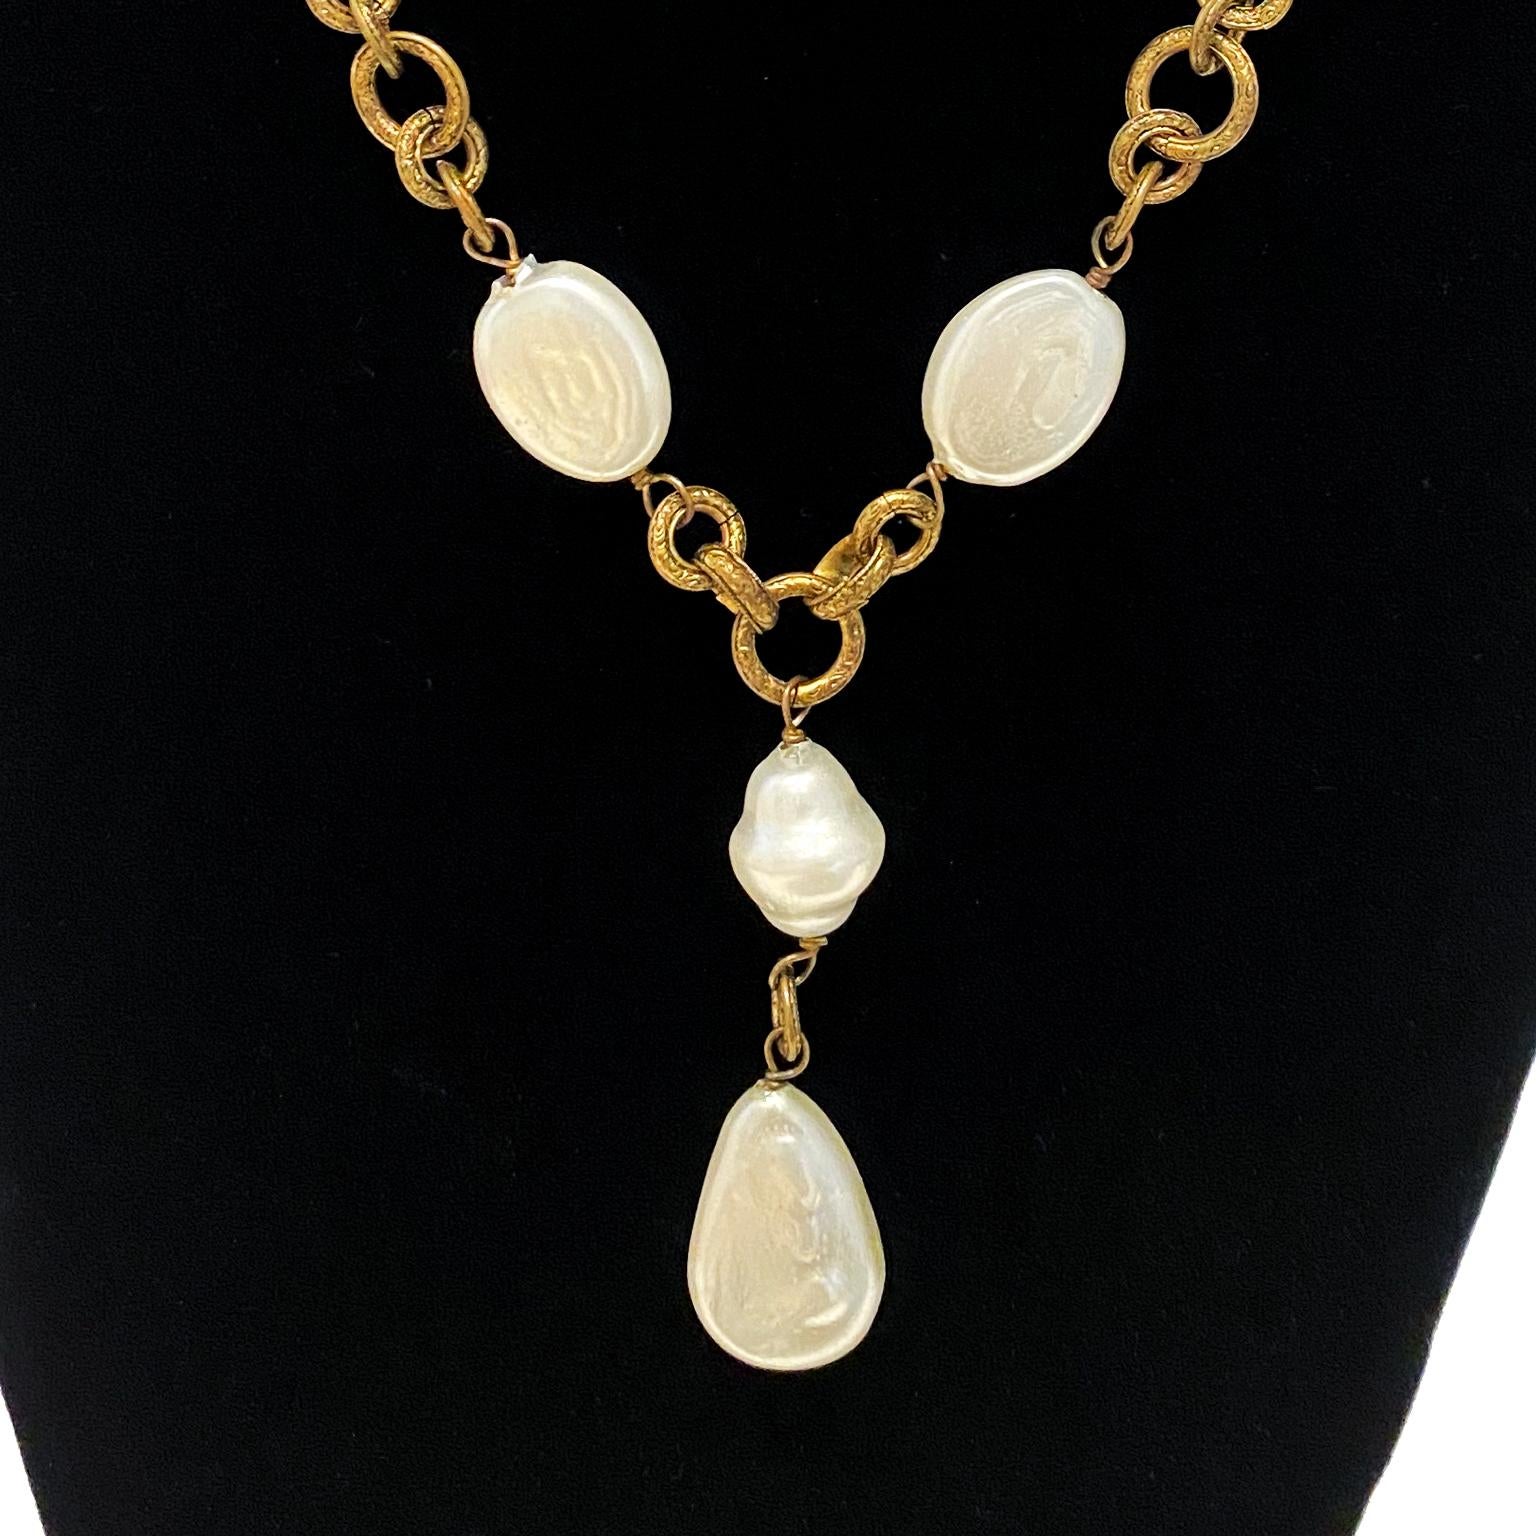 Chanel 1985 natural shape flat pearl and gilt metal chain necklace with pearl drop. Beautiful patina to the the engraved triple link chain. Pearls are in excellent condition with no signs of damage or unusual wear. Chanel 1985 date plaque mounted on